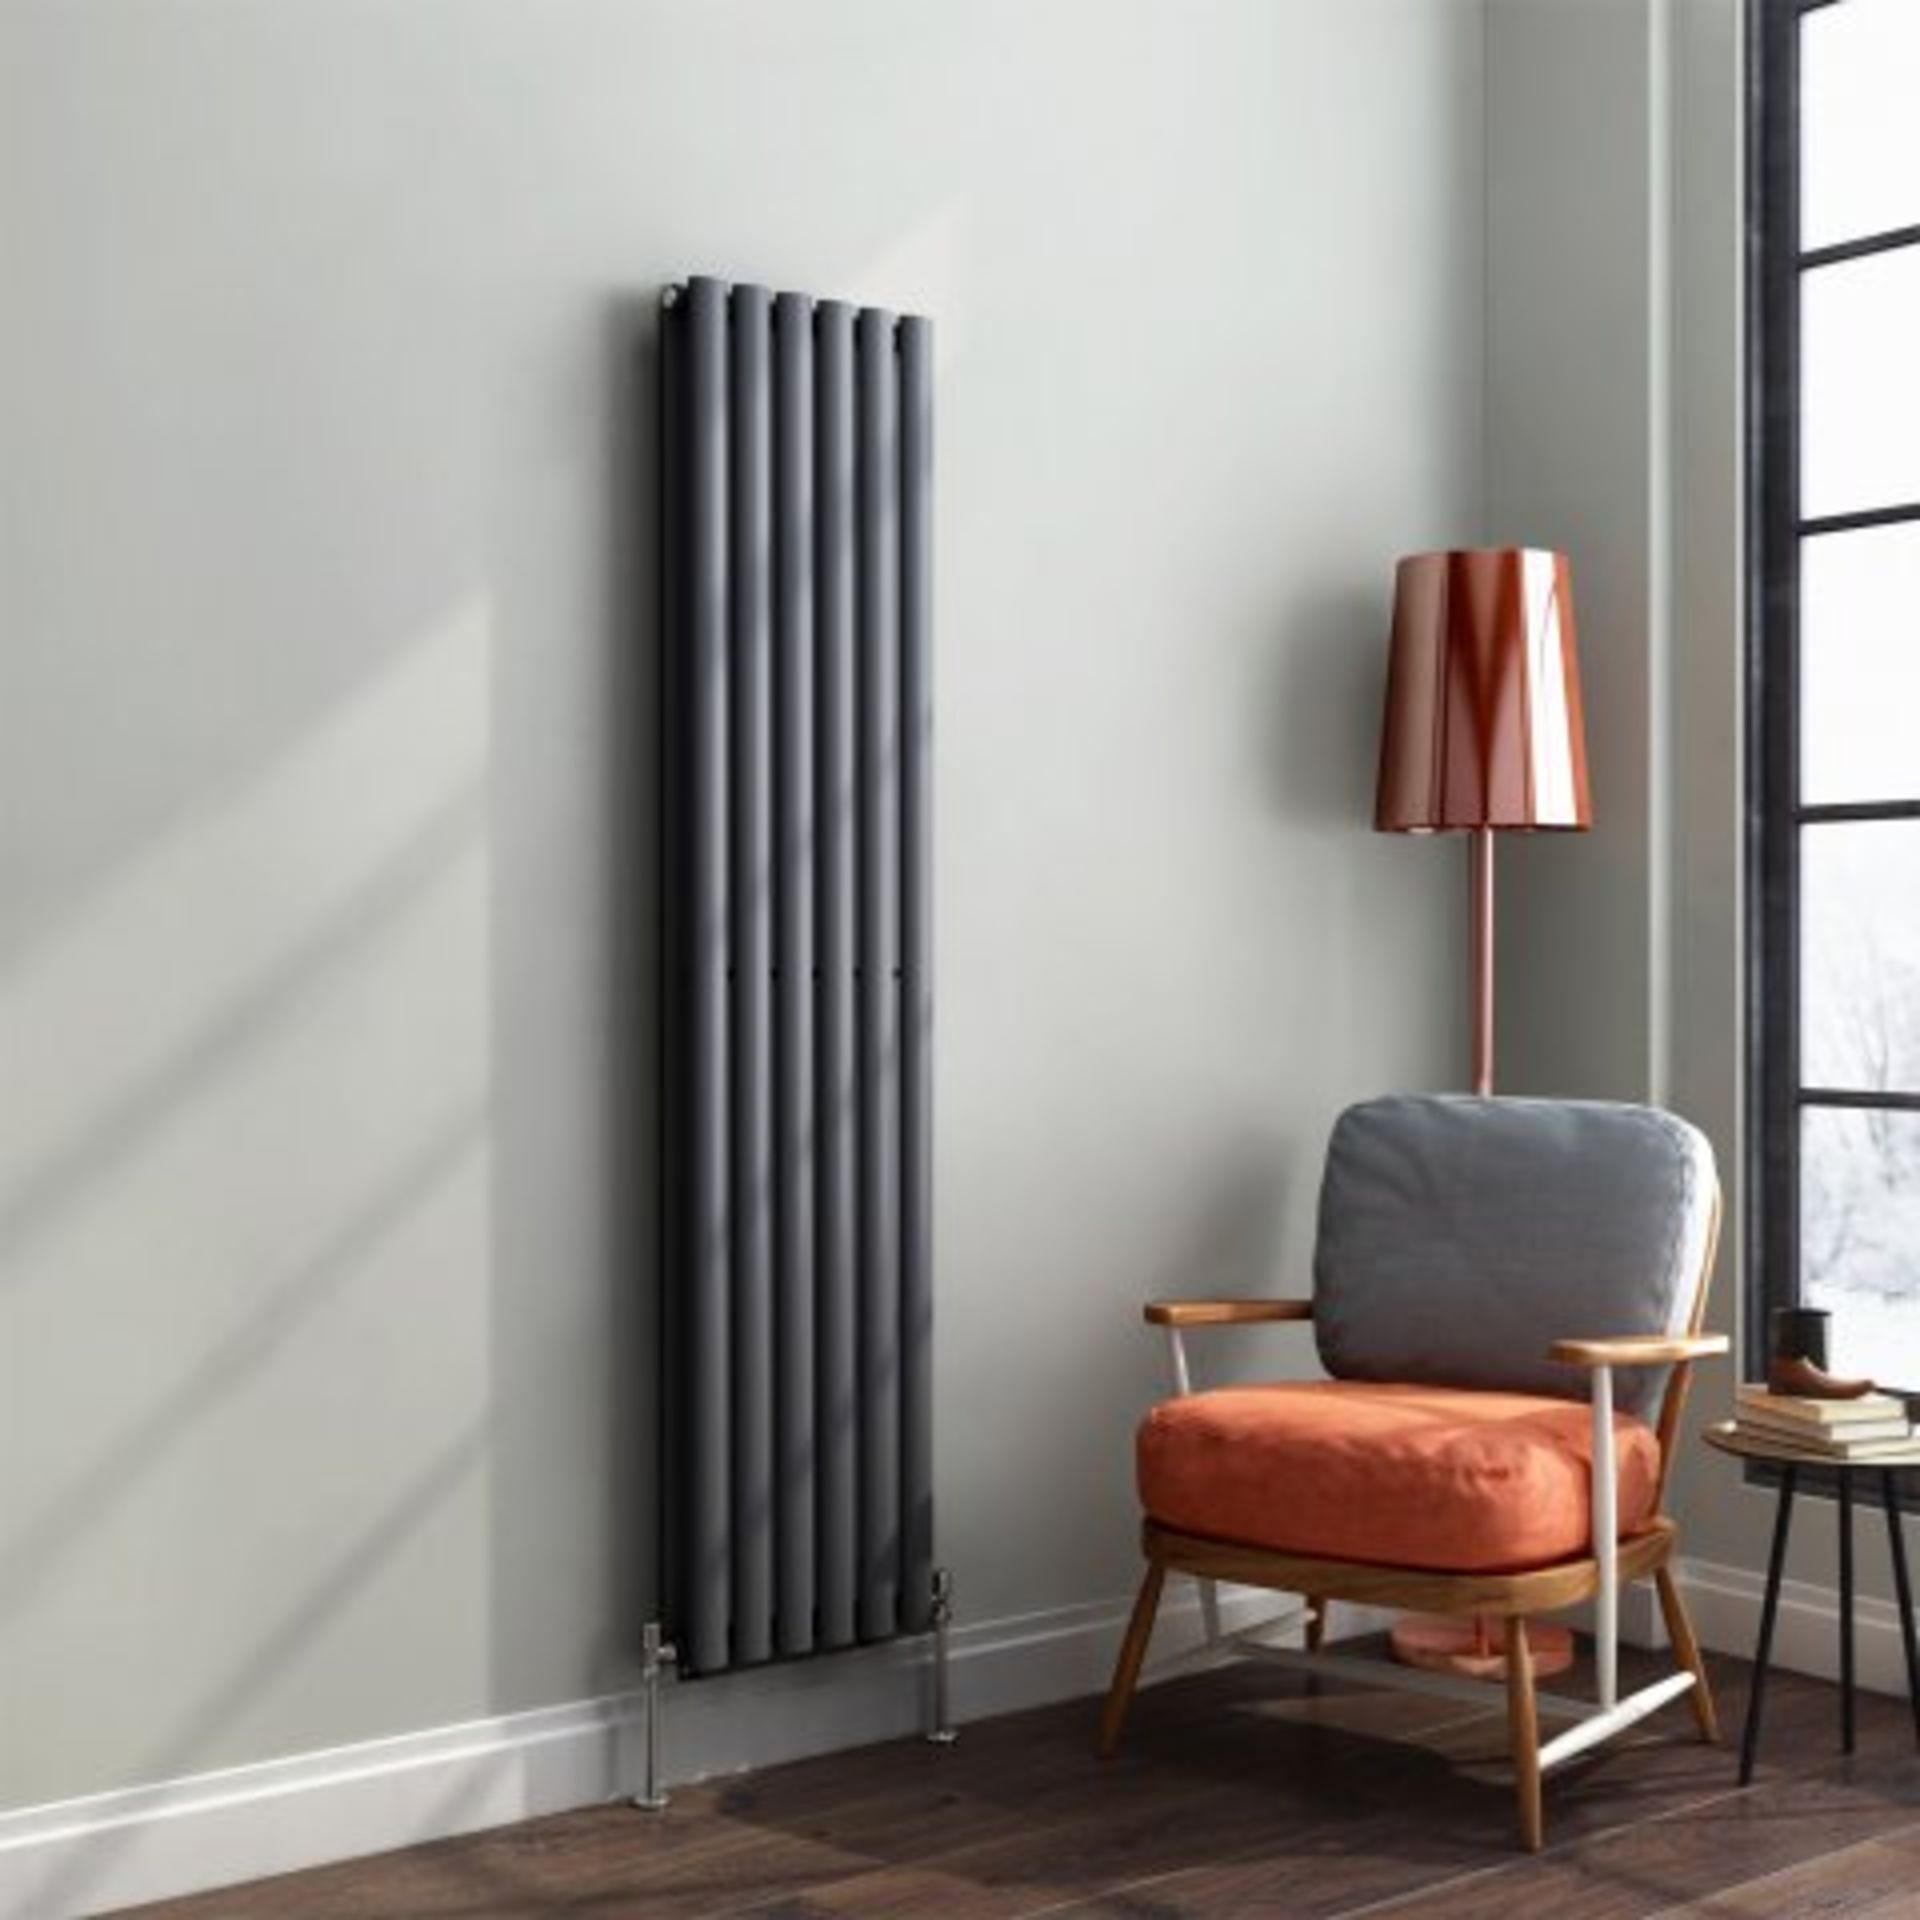 (N33) 1600x360mm Anthracite Double Oval Tube Vertical Radiator - Ember Premium. RRP £347.99. - Image 2 of 5